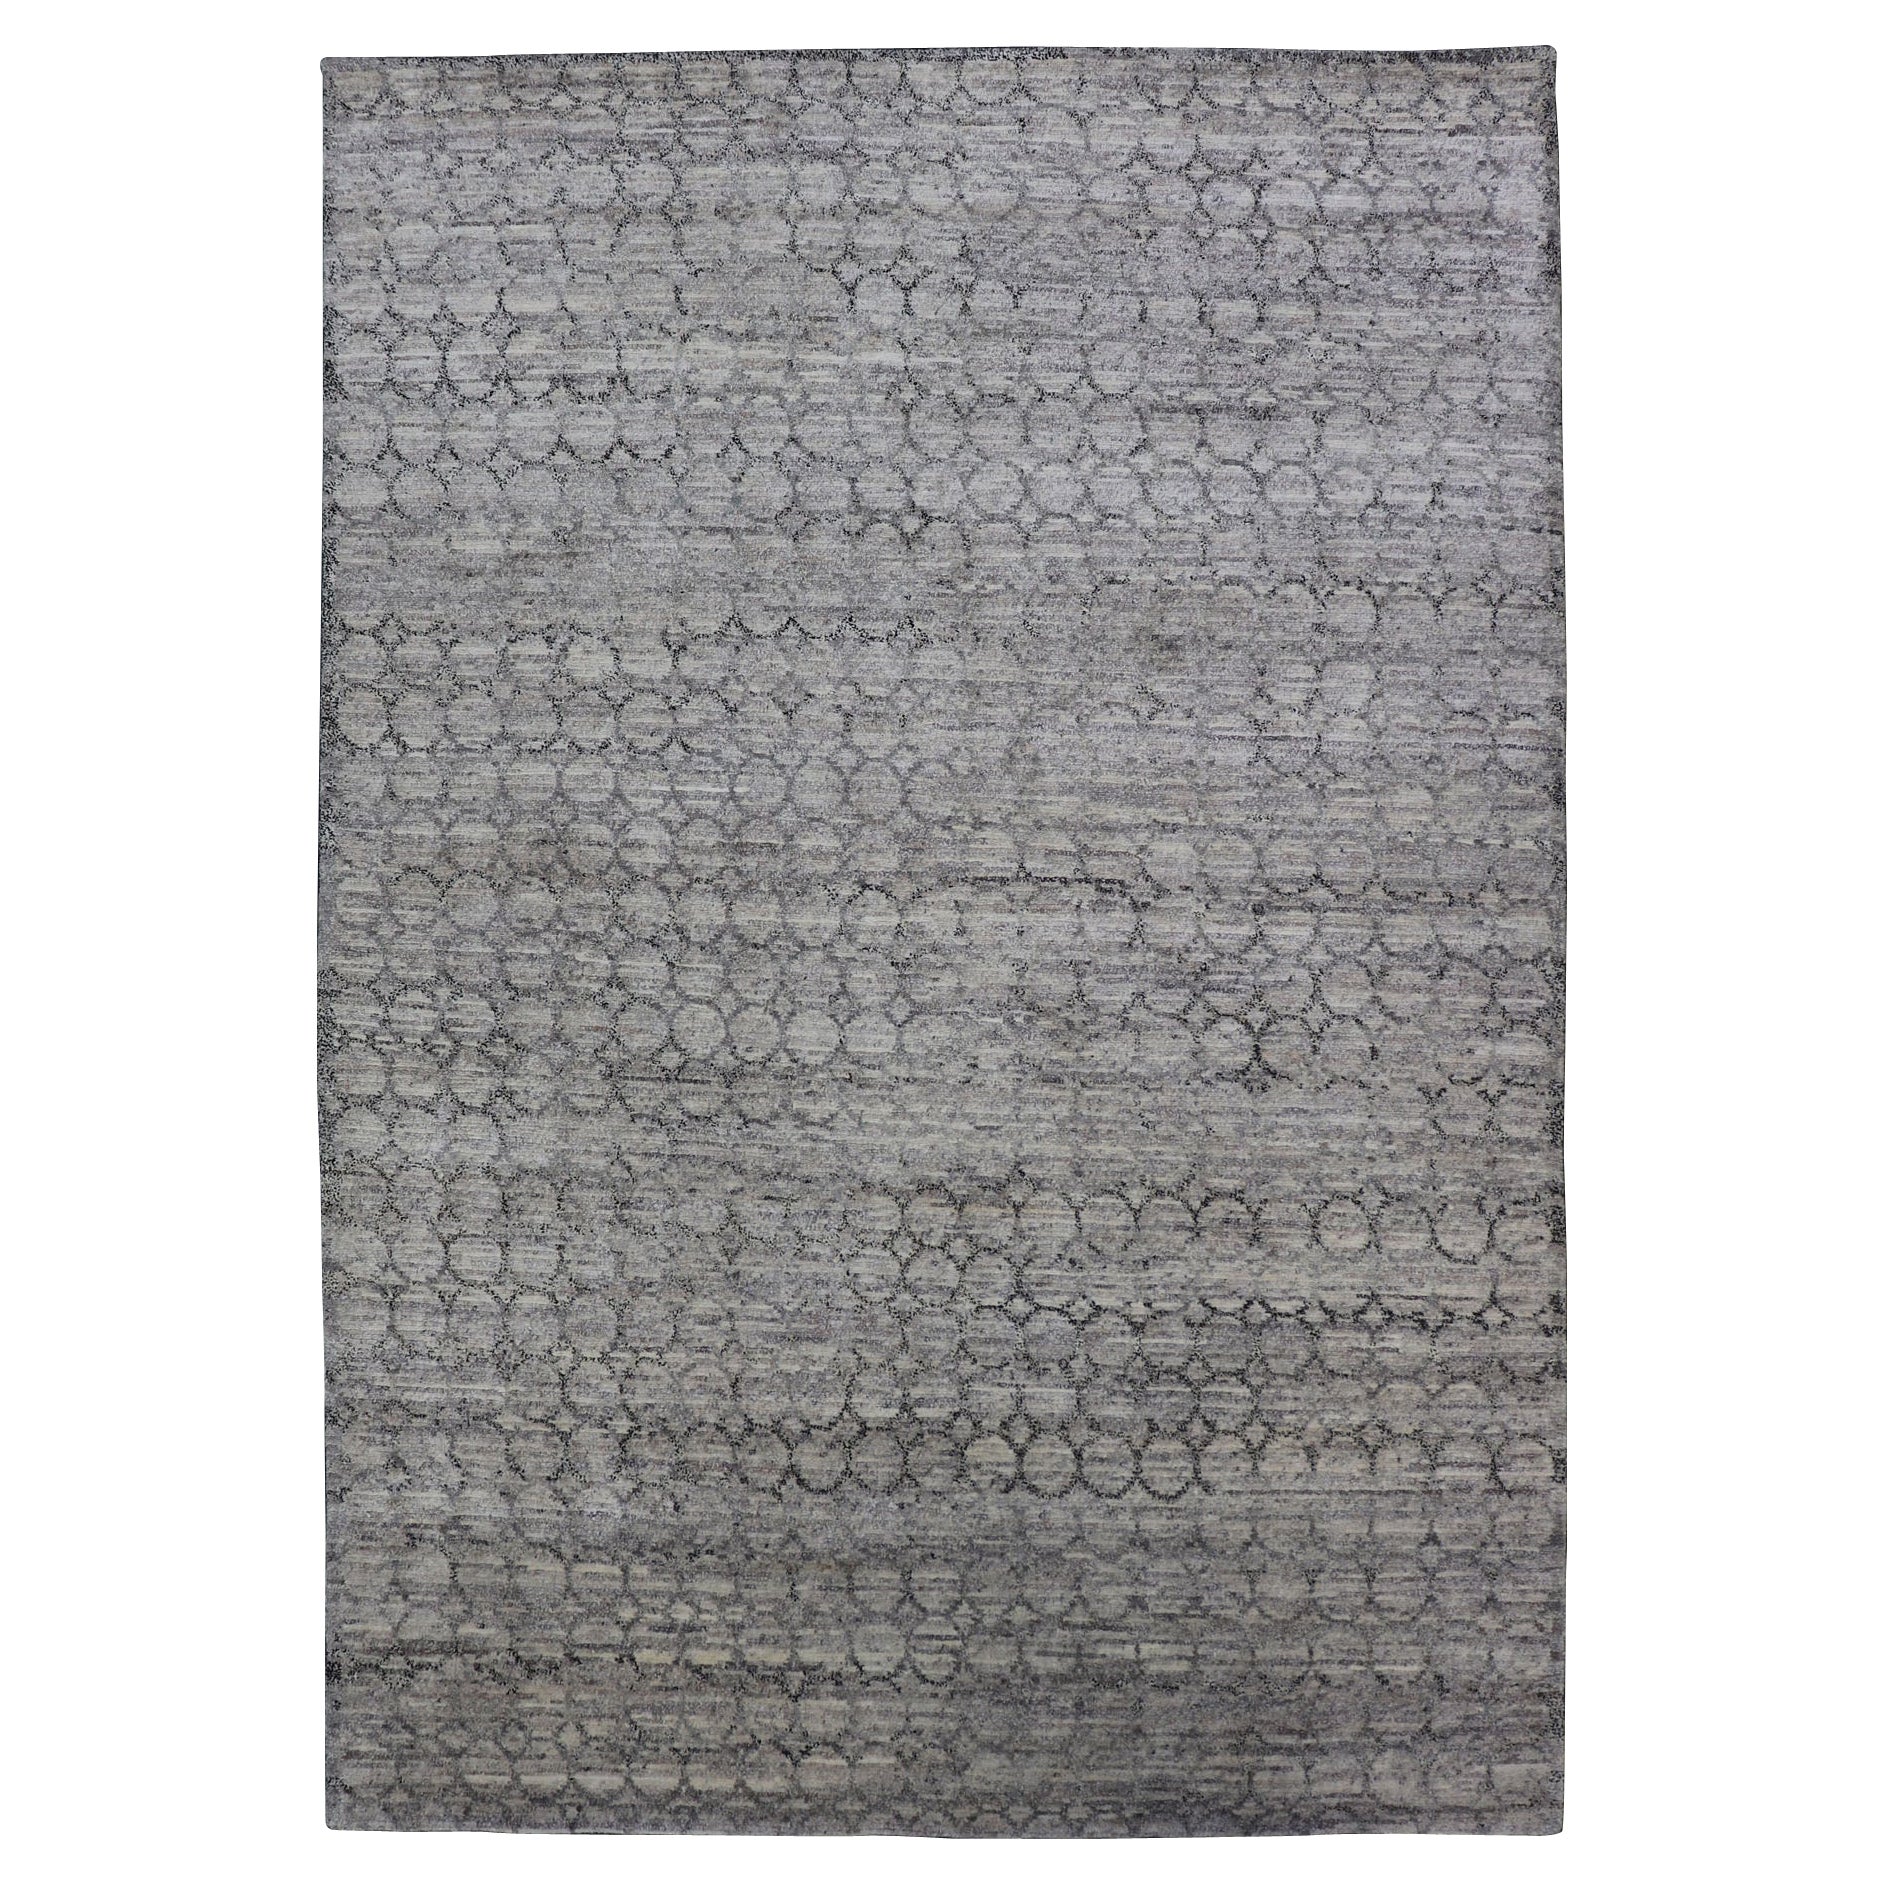 Light Grey Modern Rug with All-Over Chain Design in Dark Grey